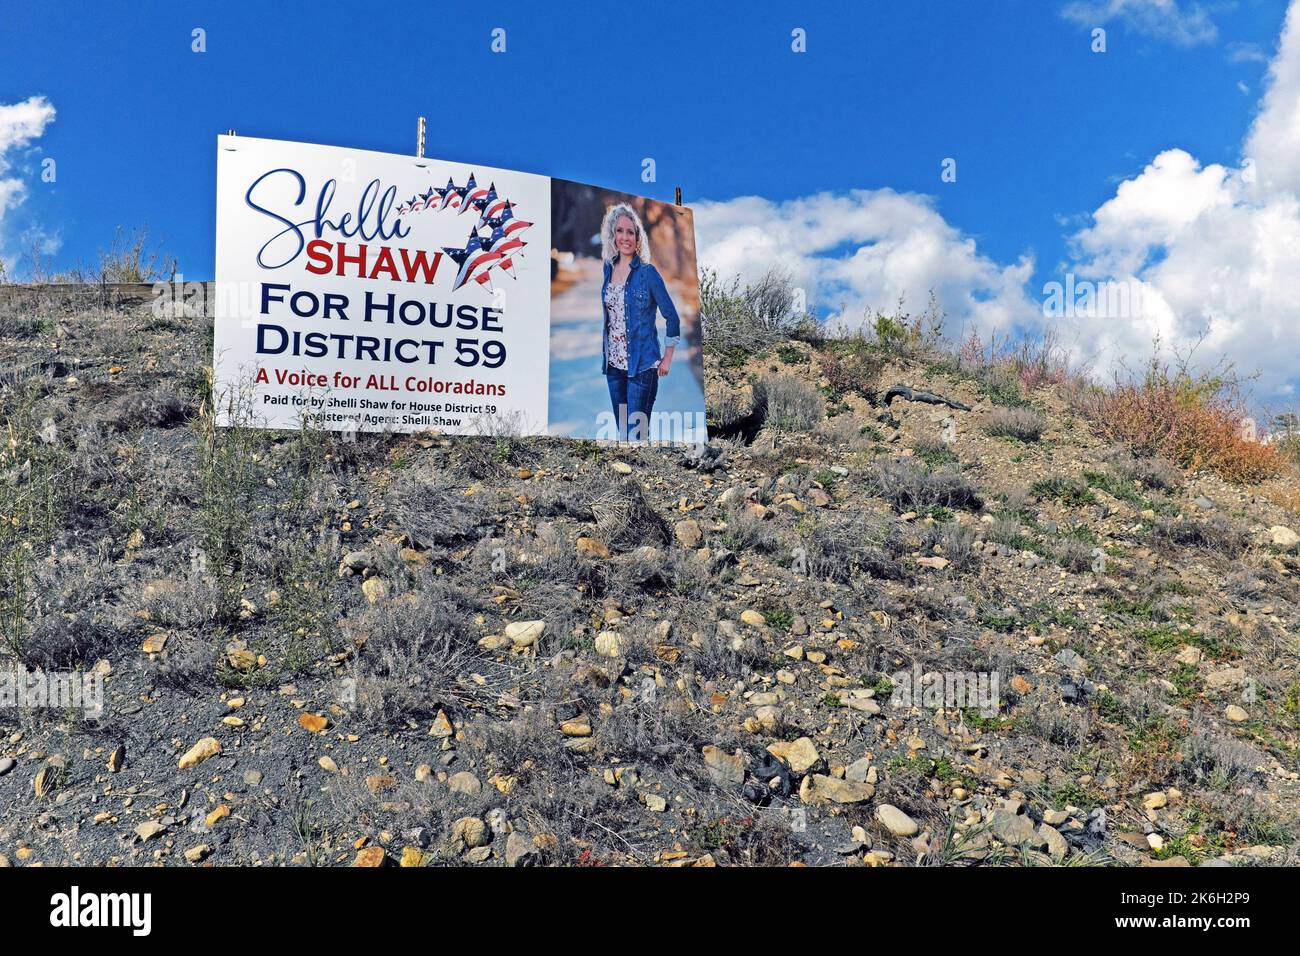 A political billboard along US Highway 160 in the conservative leaning town of Pagosa Springs, Colorado, promotes Shelli Shaw for House District 59. Stock Photo